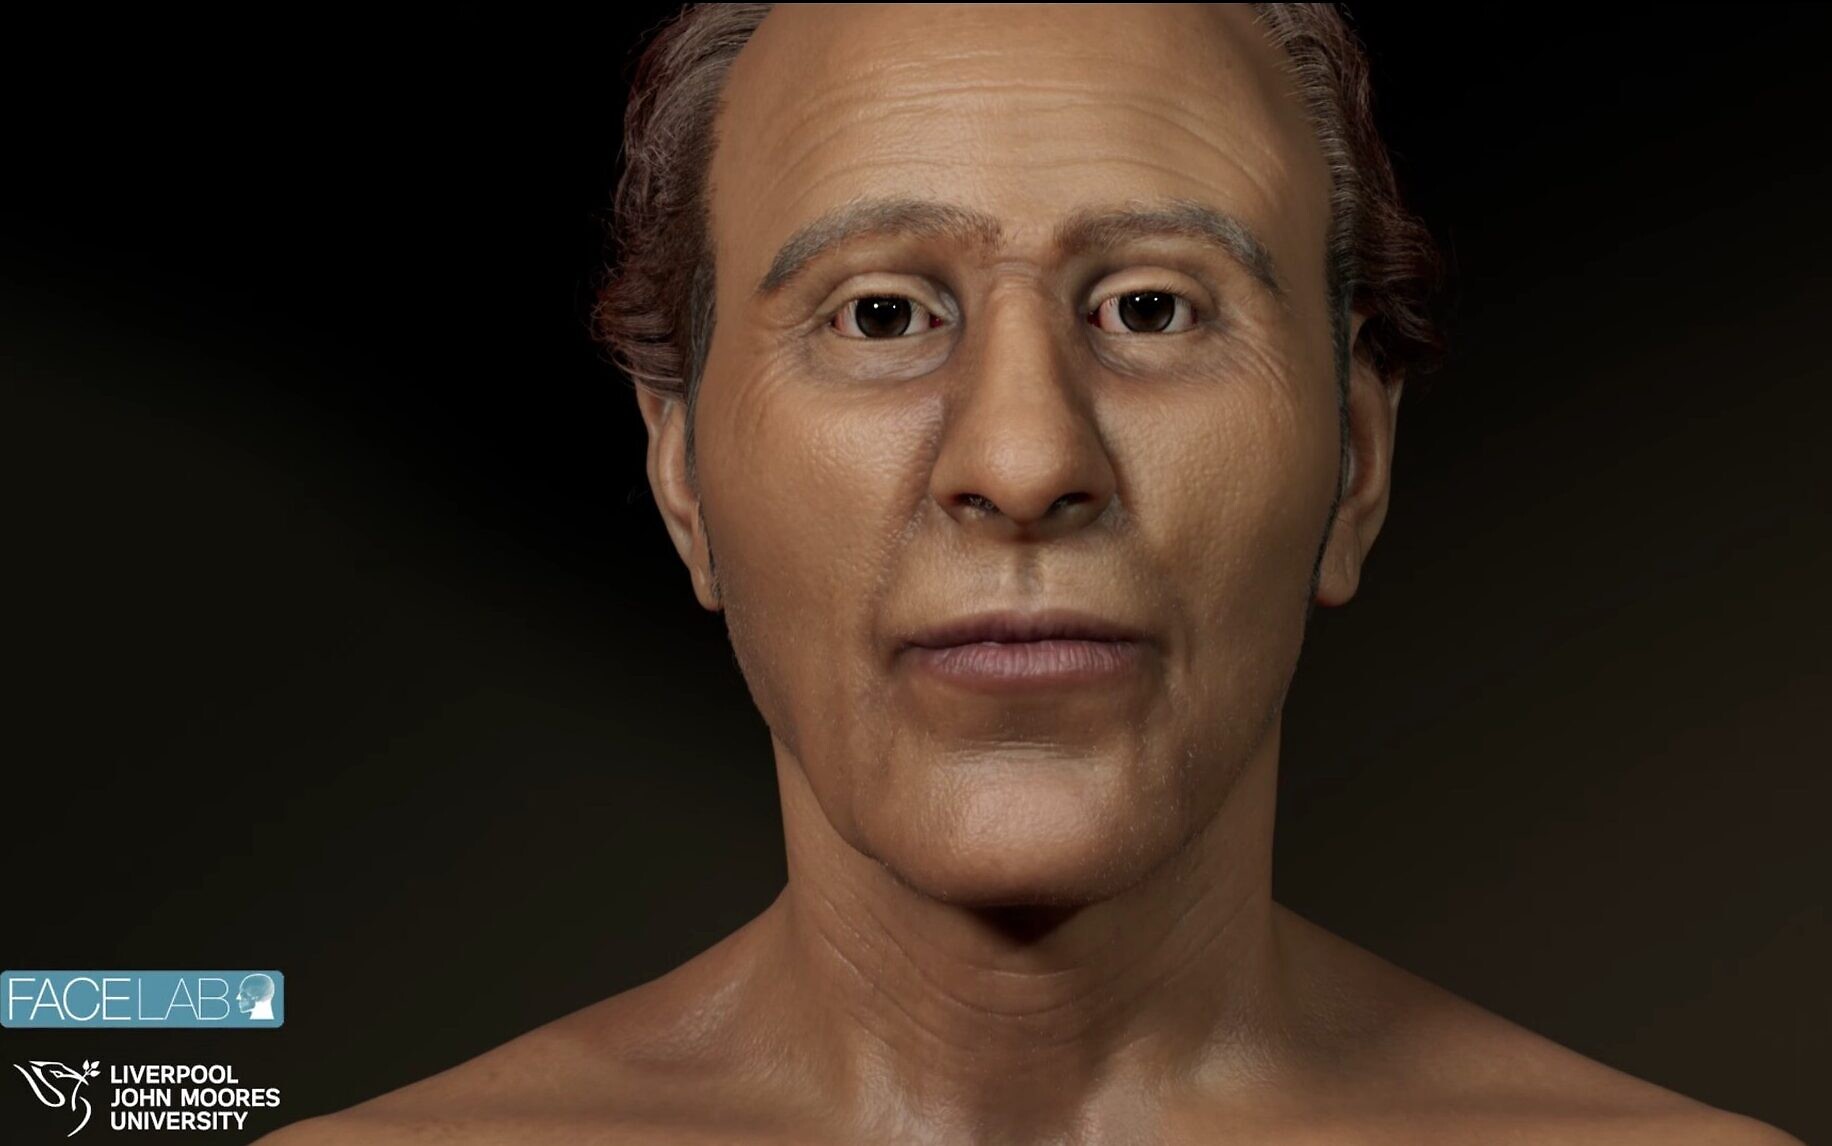 Watch the Evolution of Man's Face in Under 2 Minutes With This Video